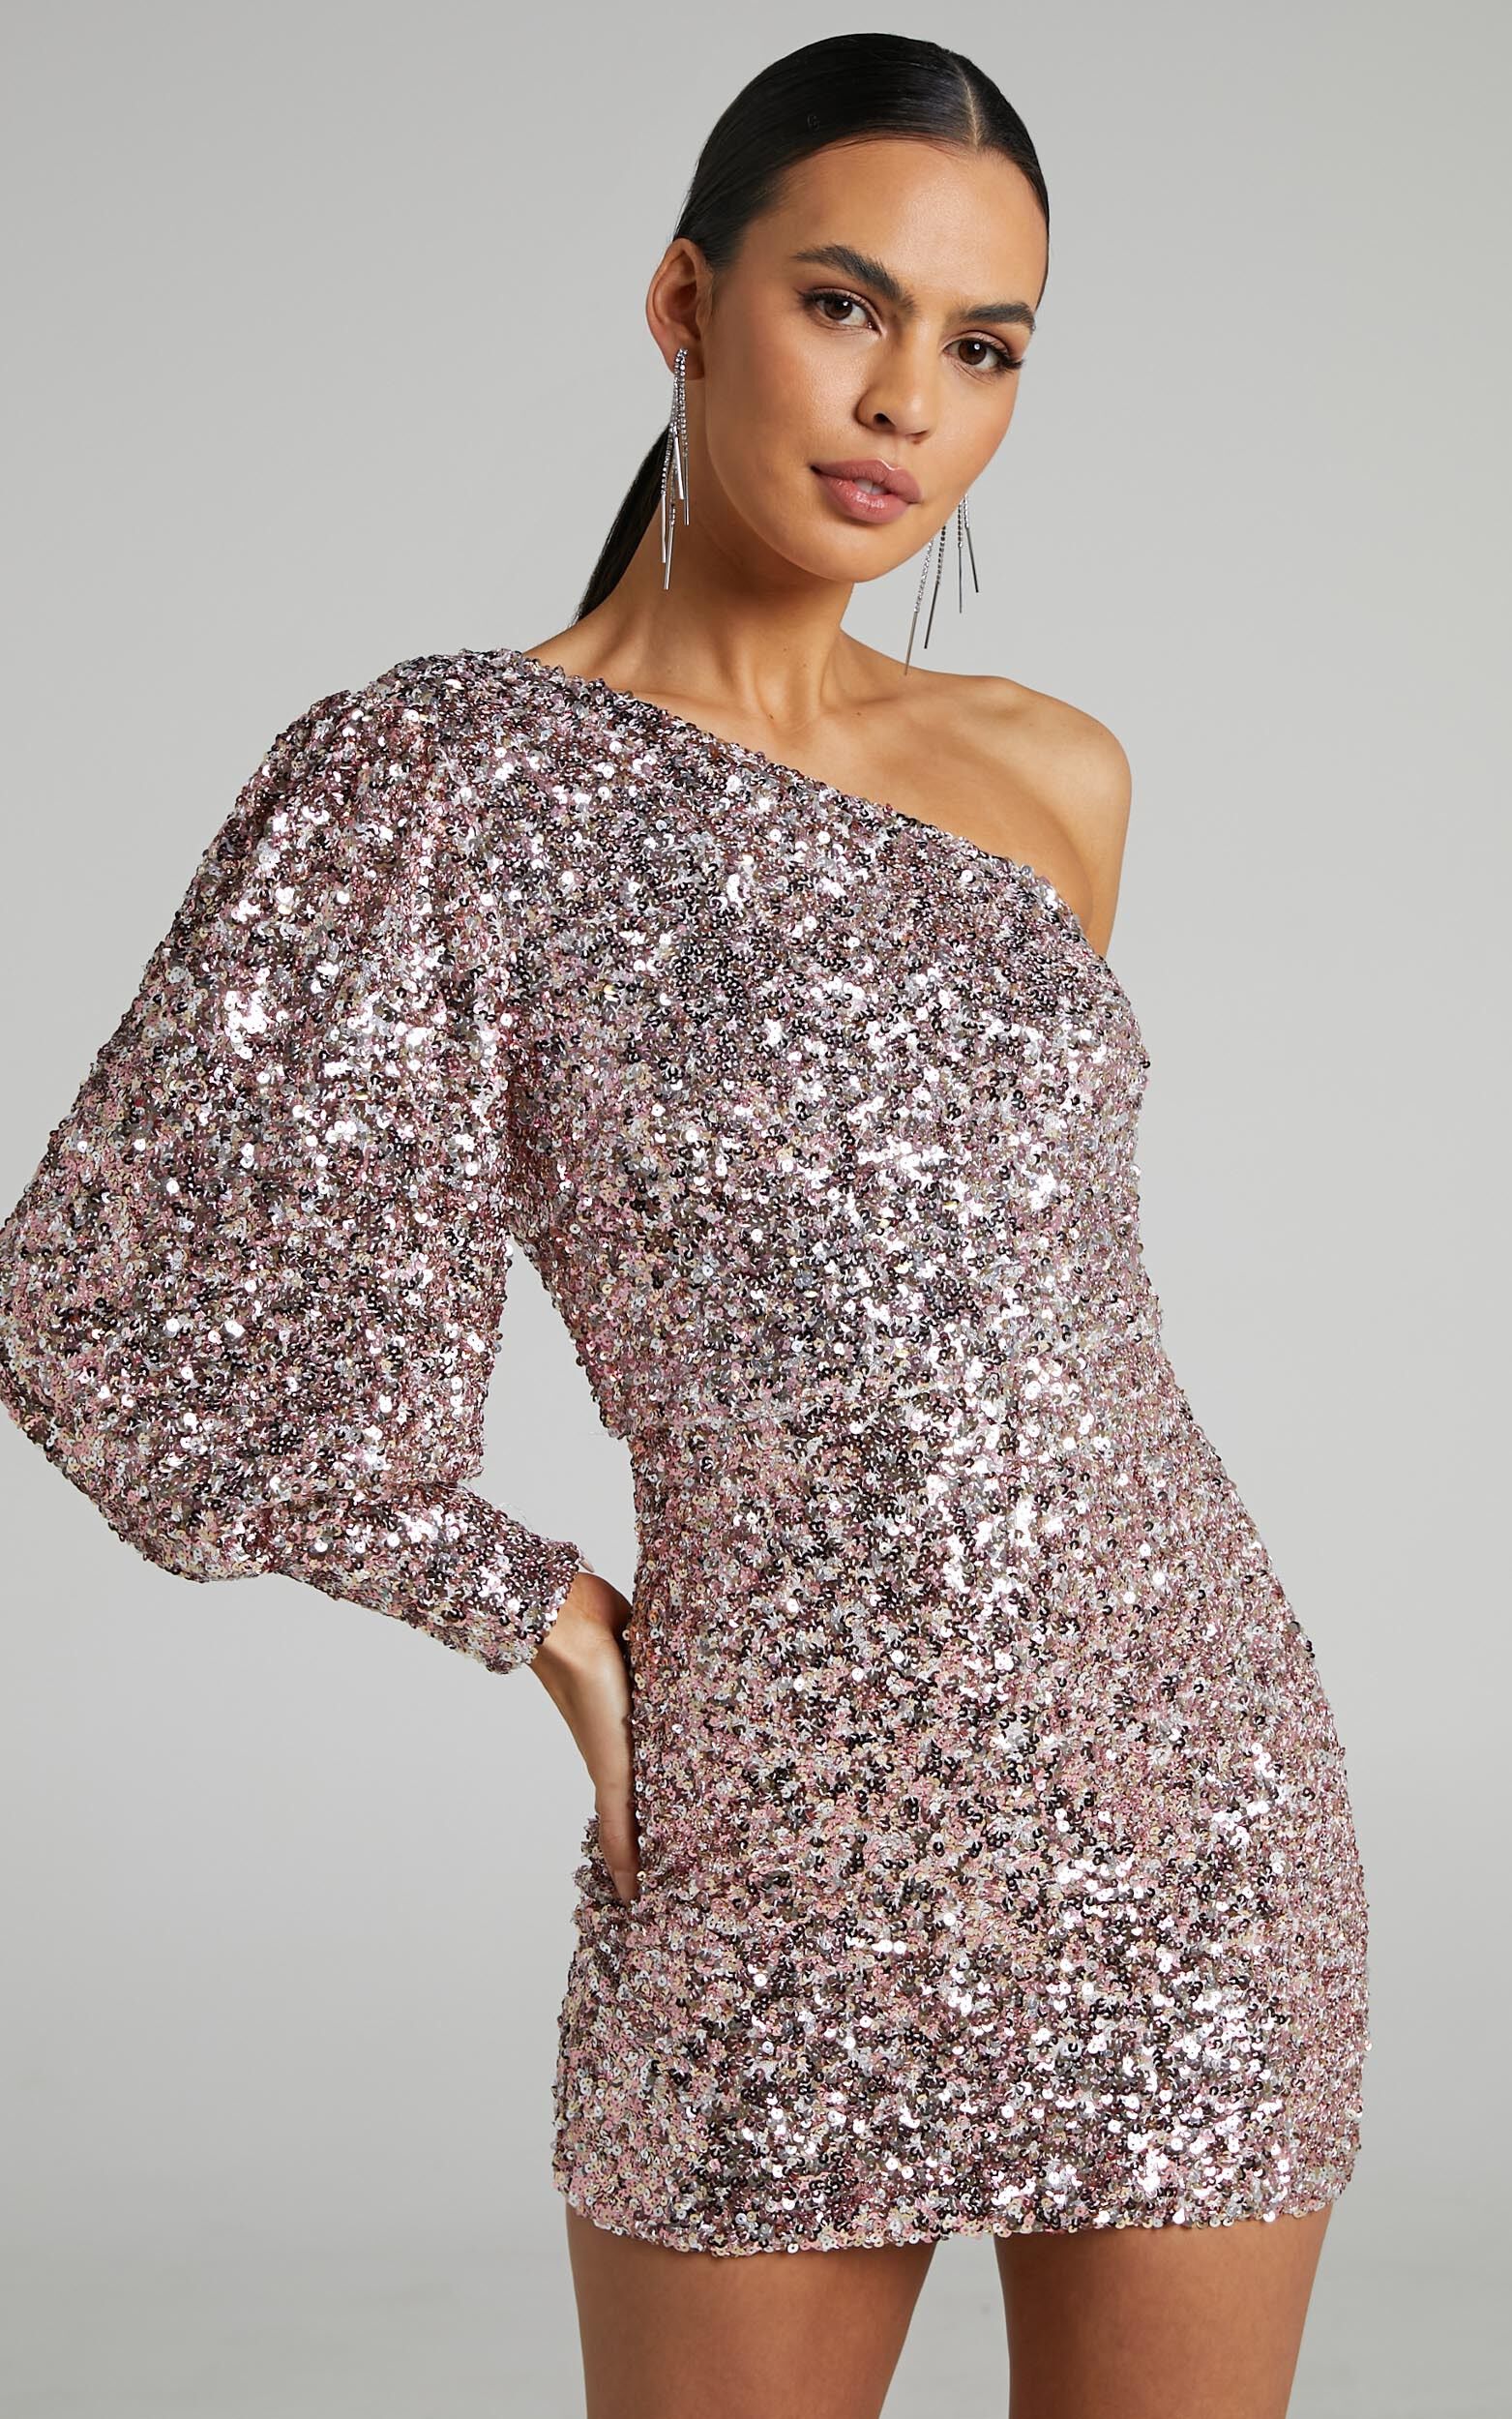 Luecia Asymmetric One Shoulder Puff Sleeve Mini Dress in Pink Sequin - 06, PNK2, super-hi-res image number null